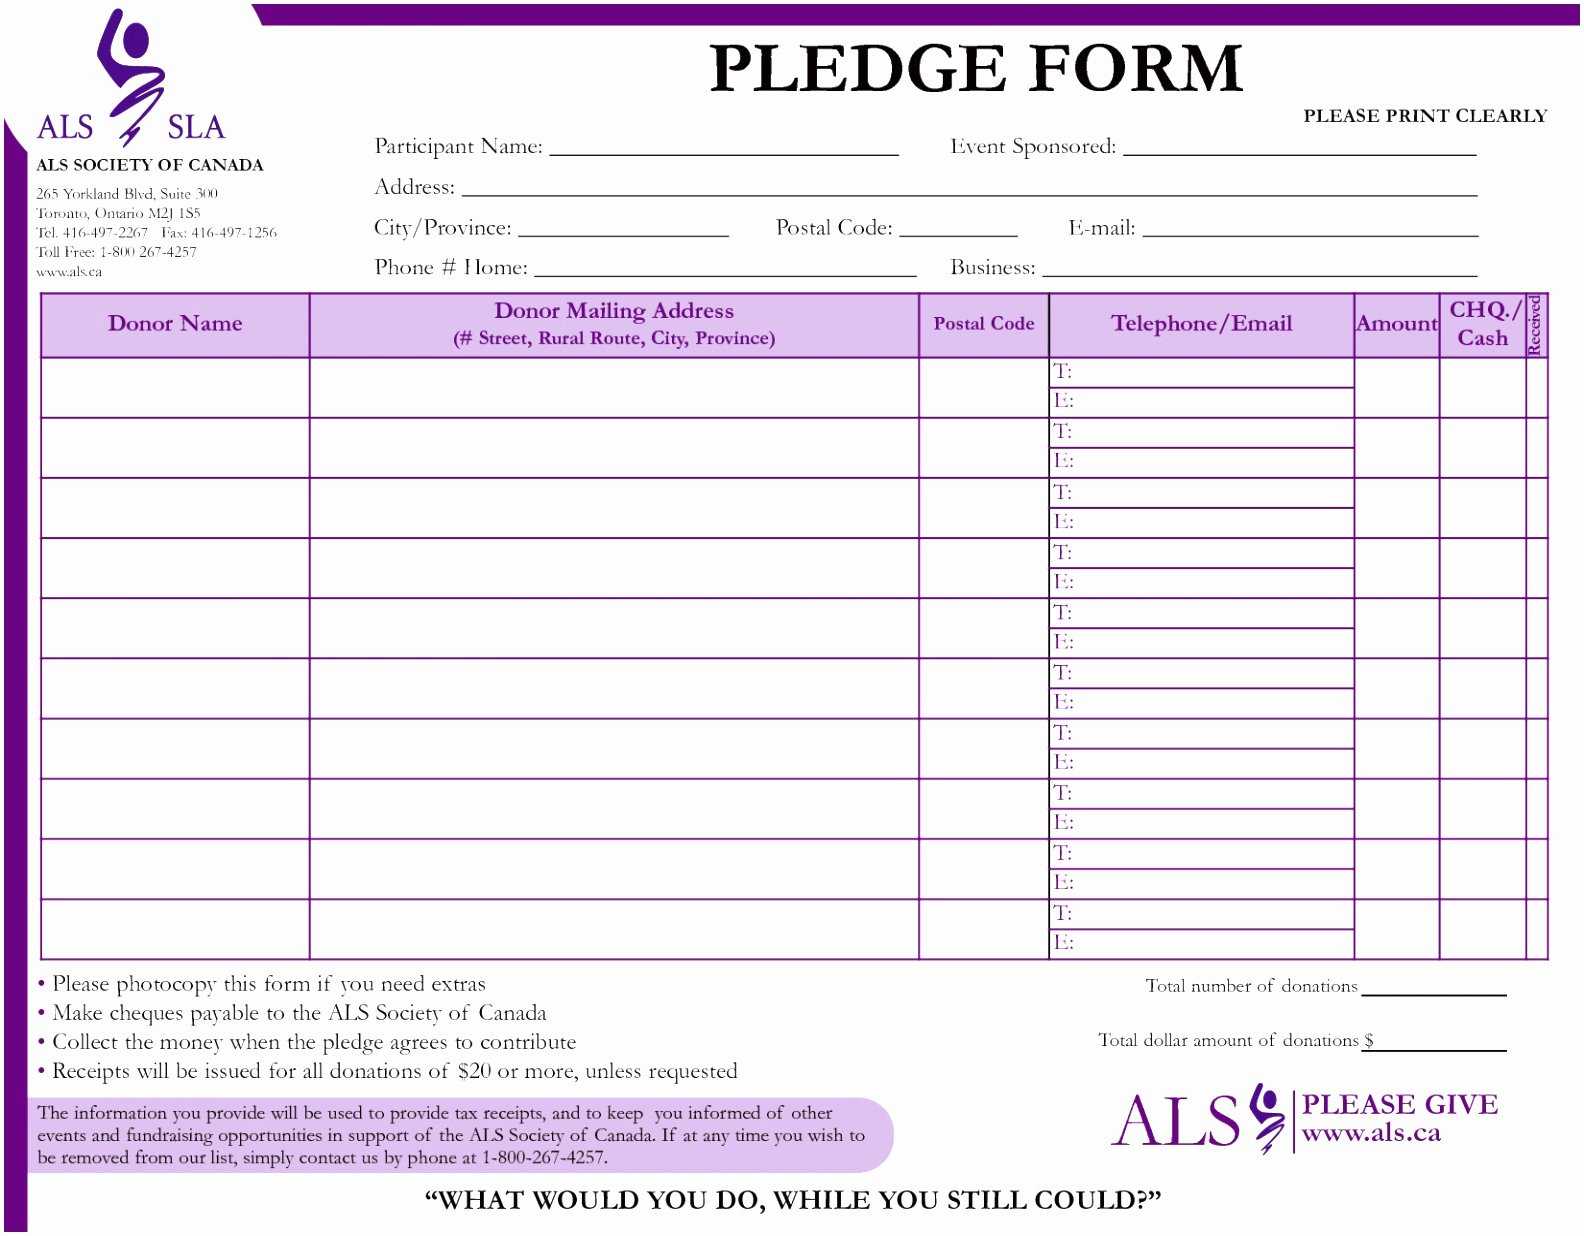 039 Pledge Card Template Word Best Of Fundraiser Form Pttyt Throughout Fundraising Pledge Card Template